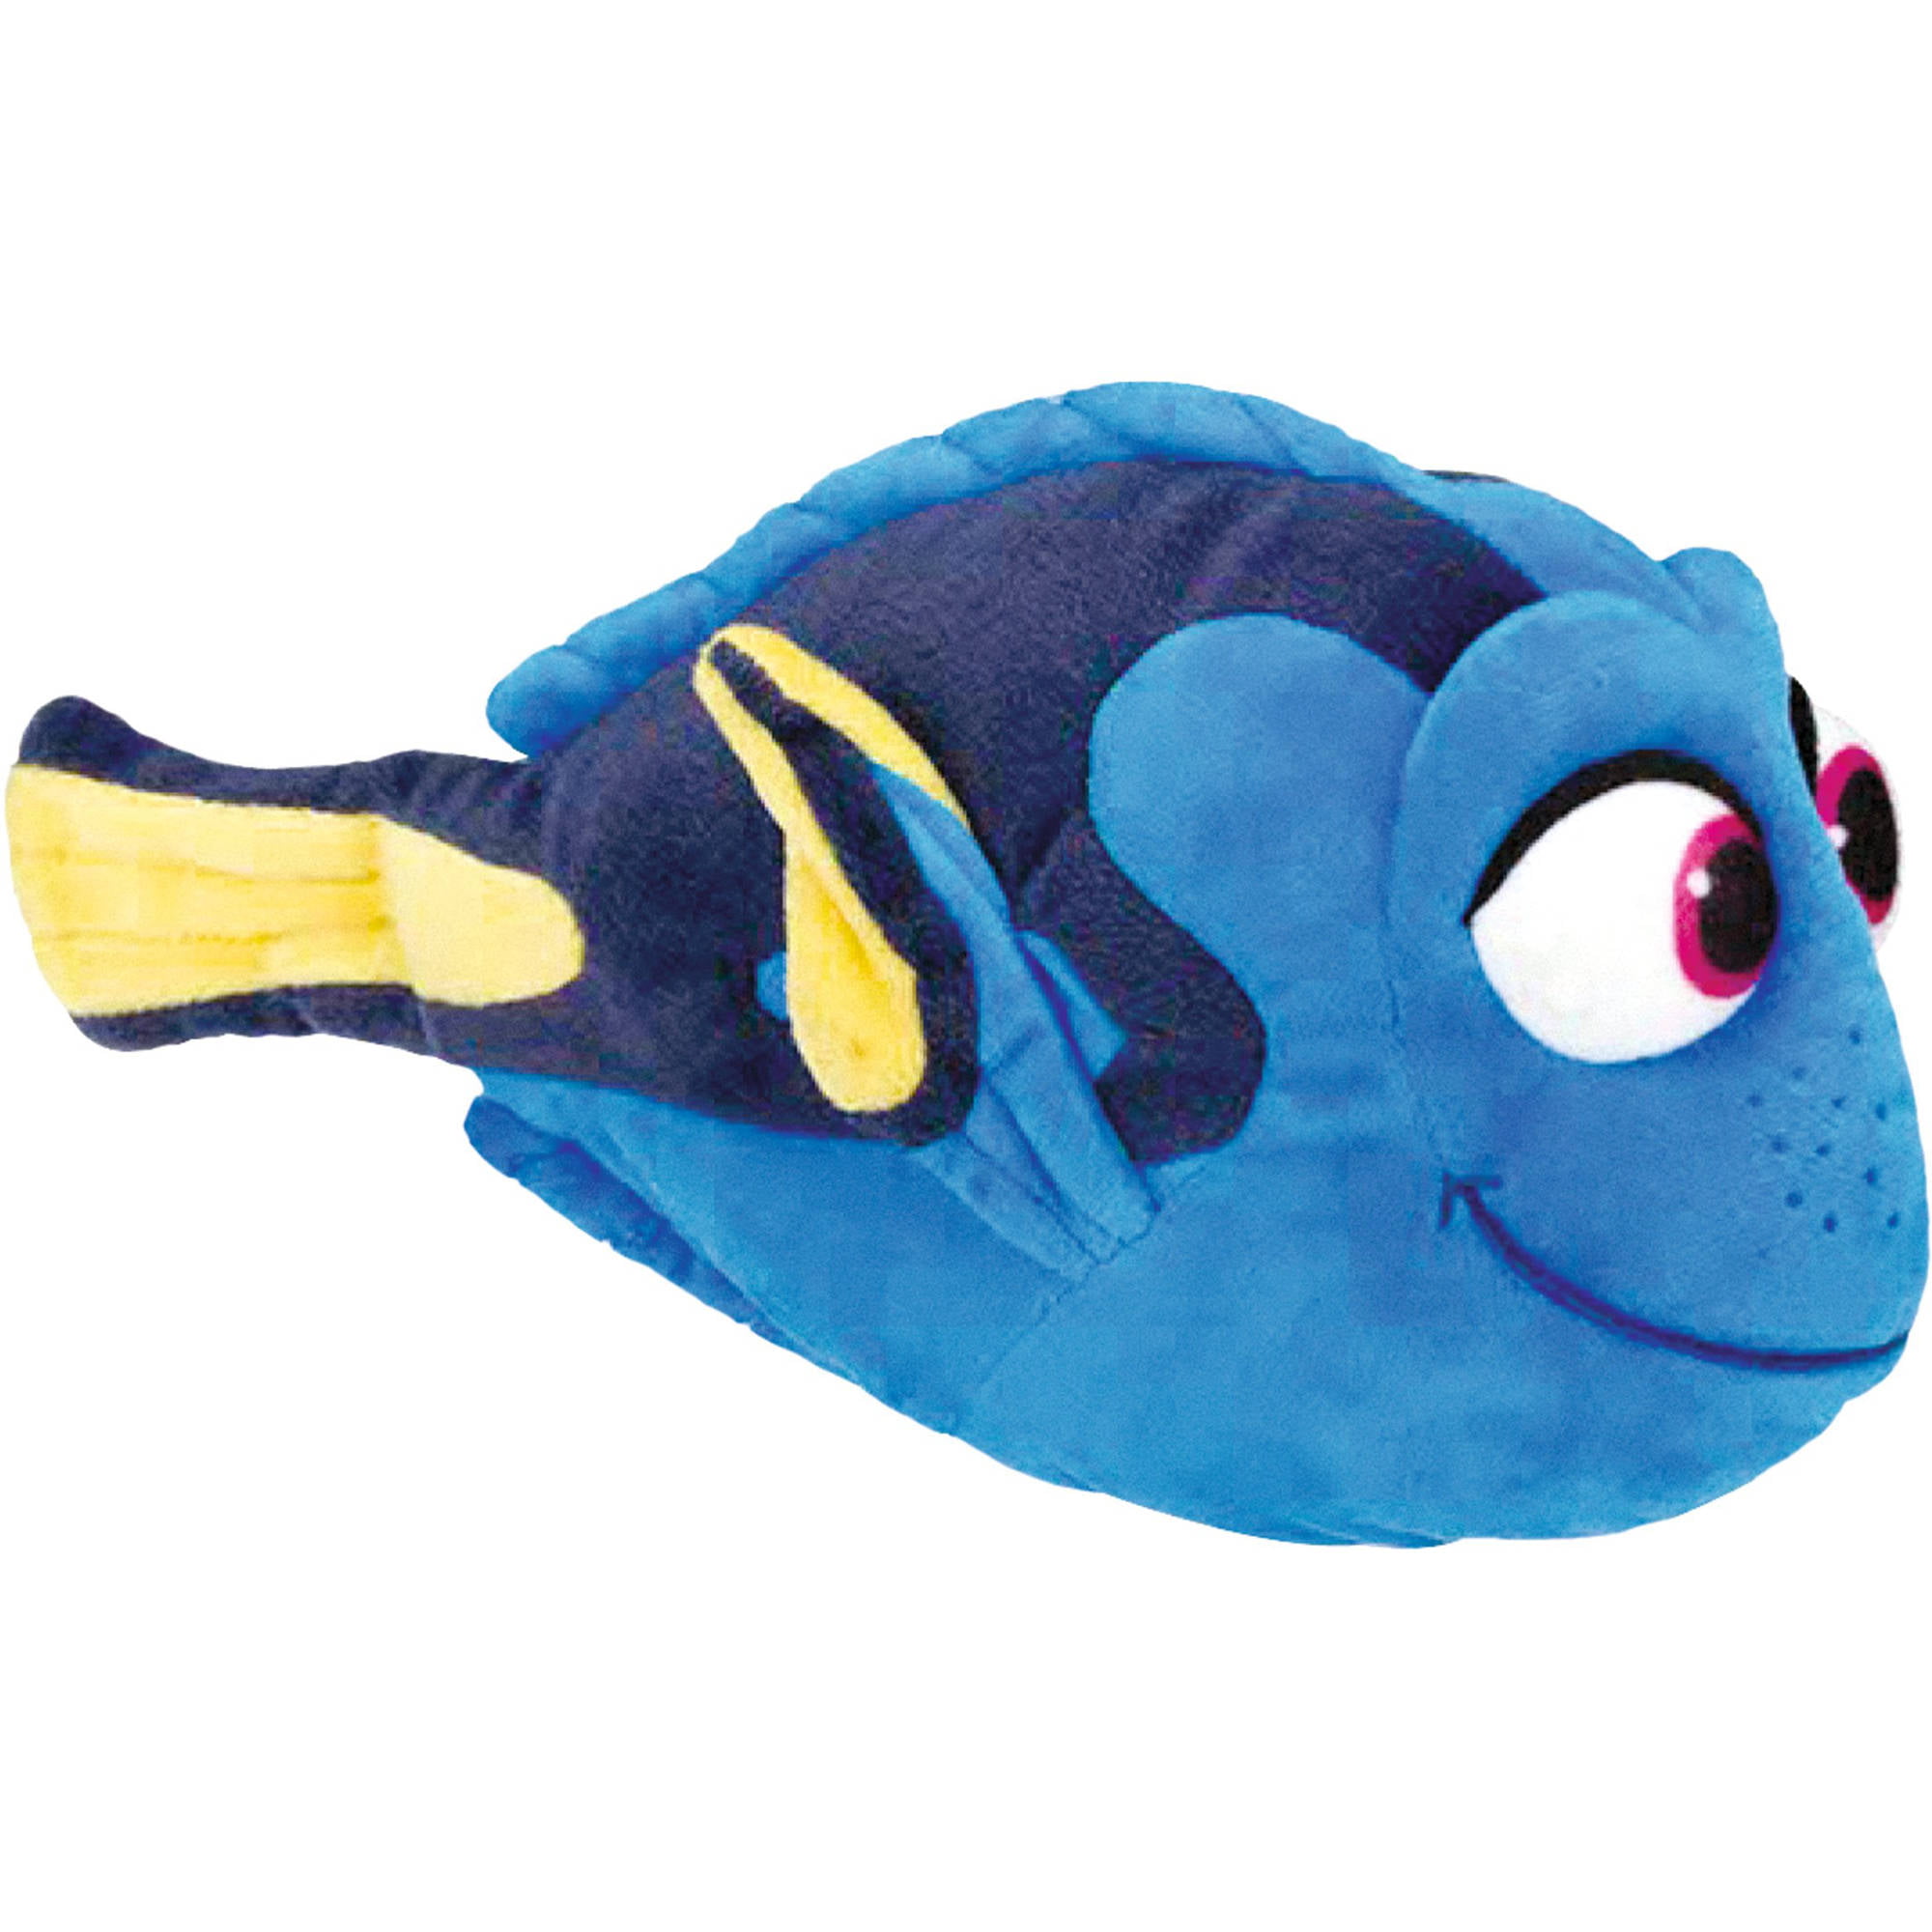 finding dory toys walmart